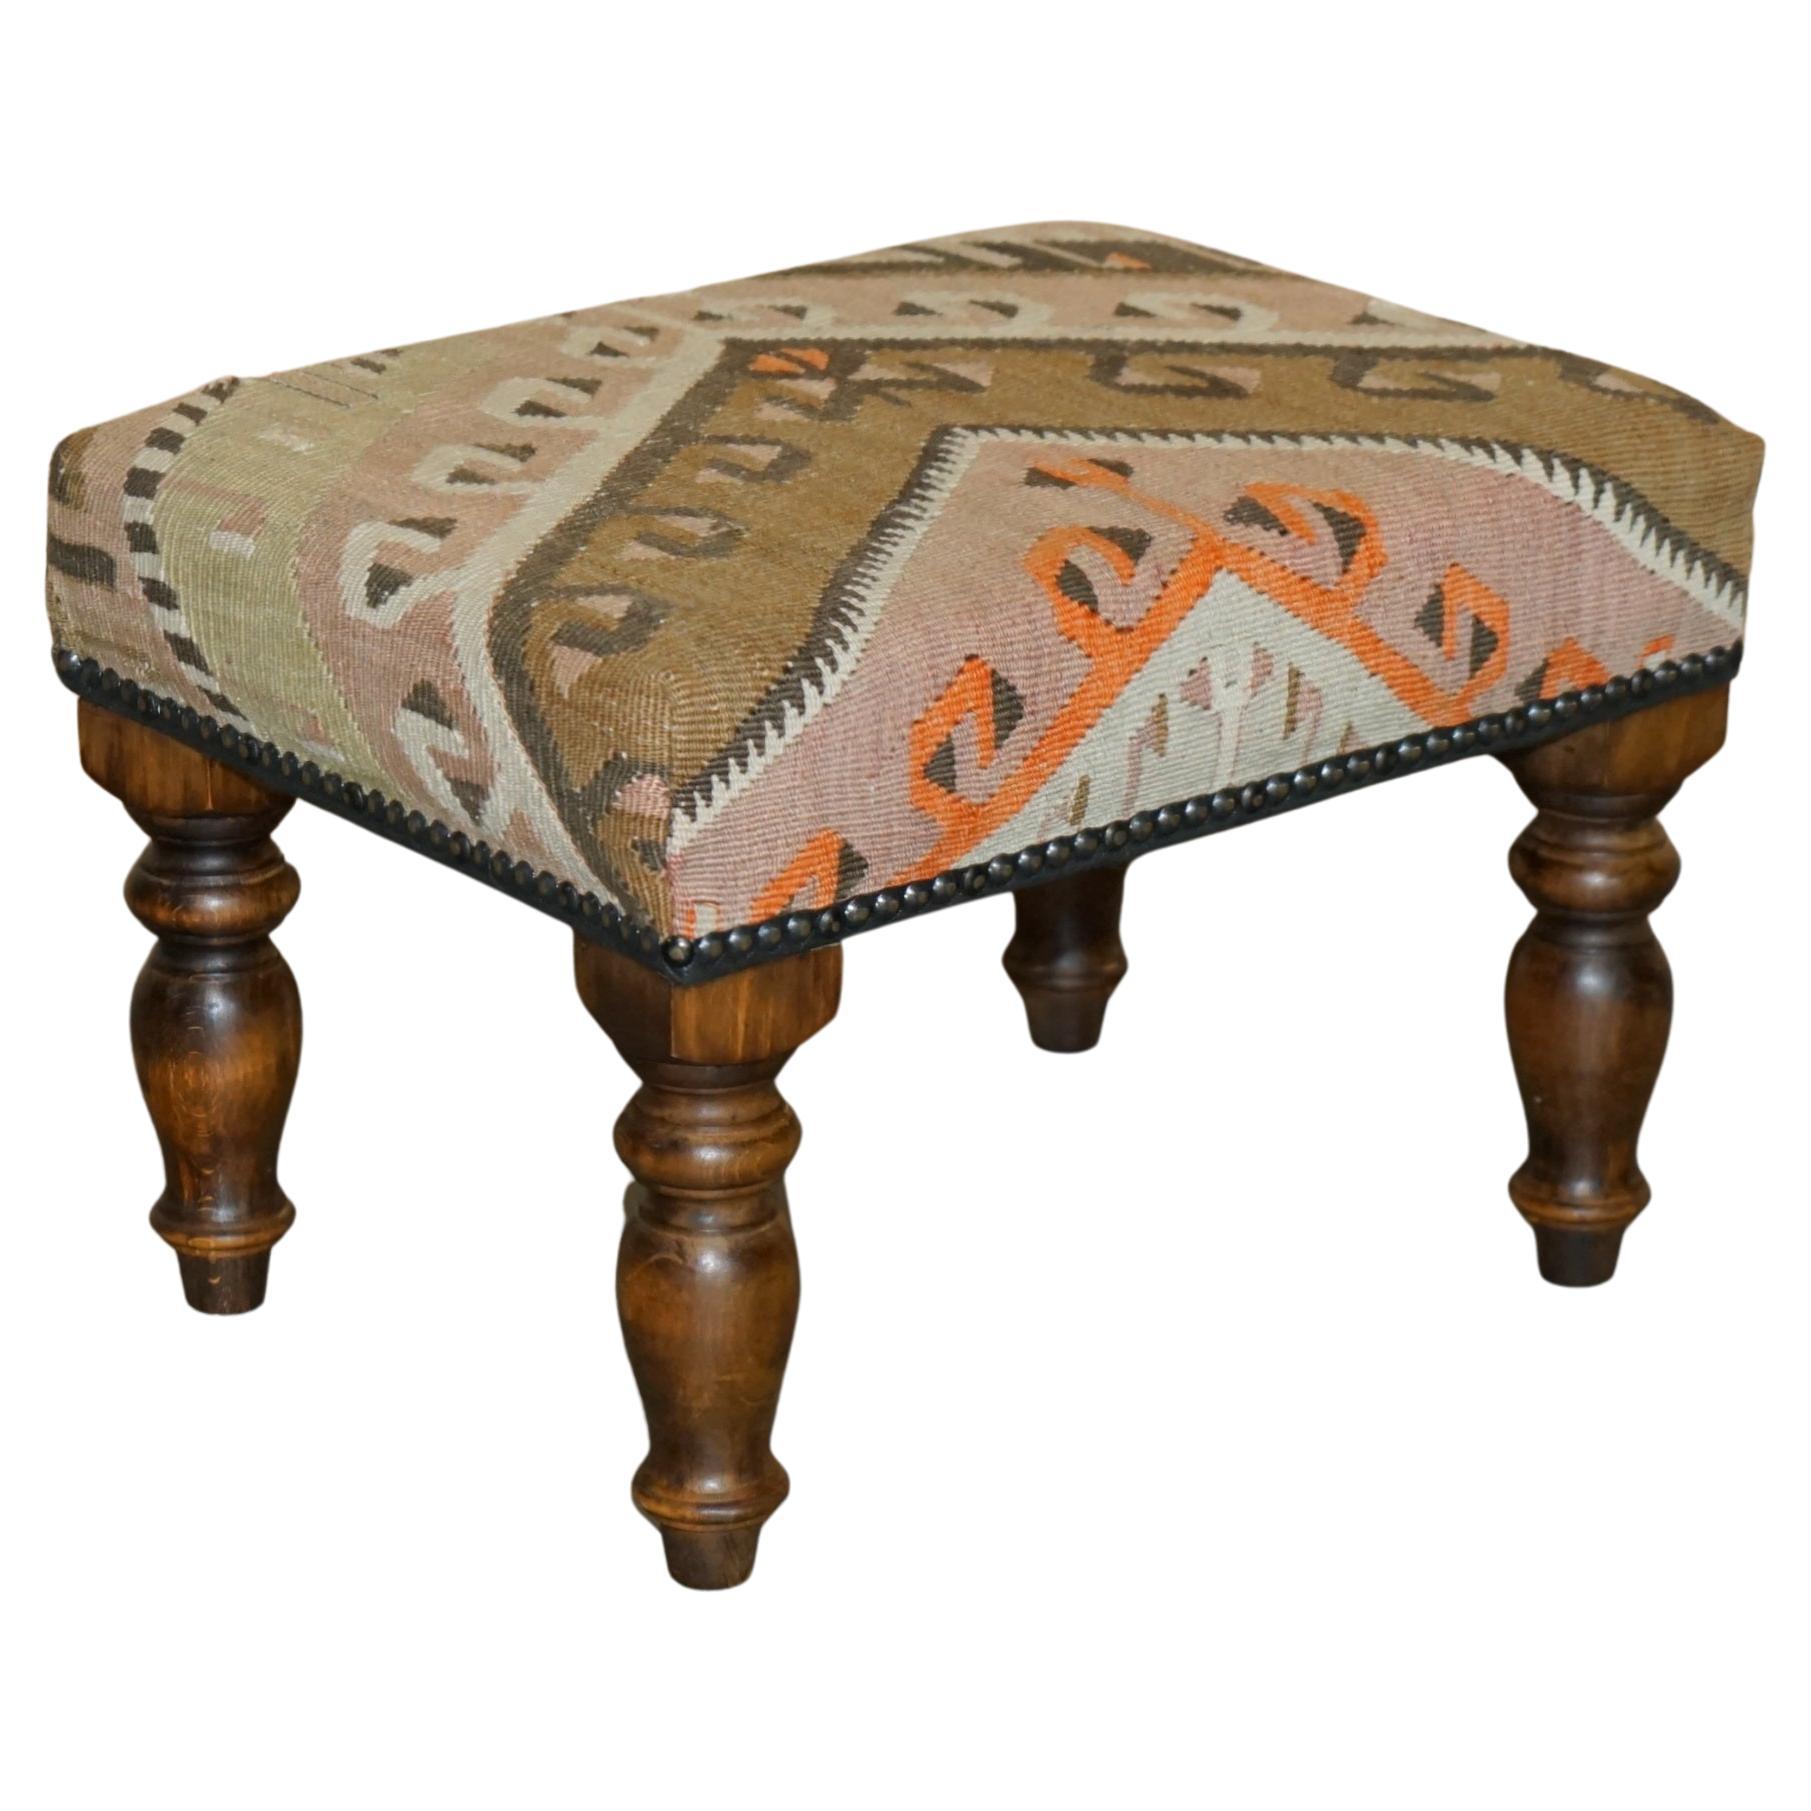 STUNNiNG & COLLECTABLE GEORGE SMITH CHELSEA KILIM FOOTSTOOL OTTOMAN